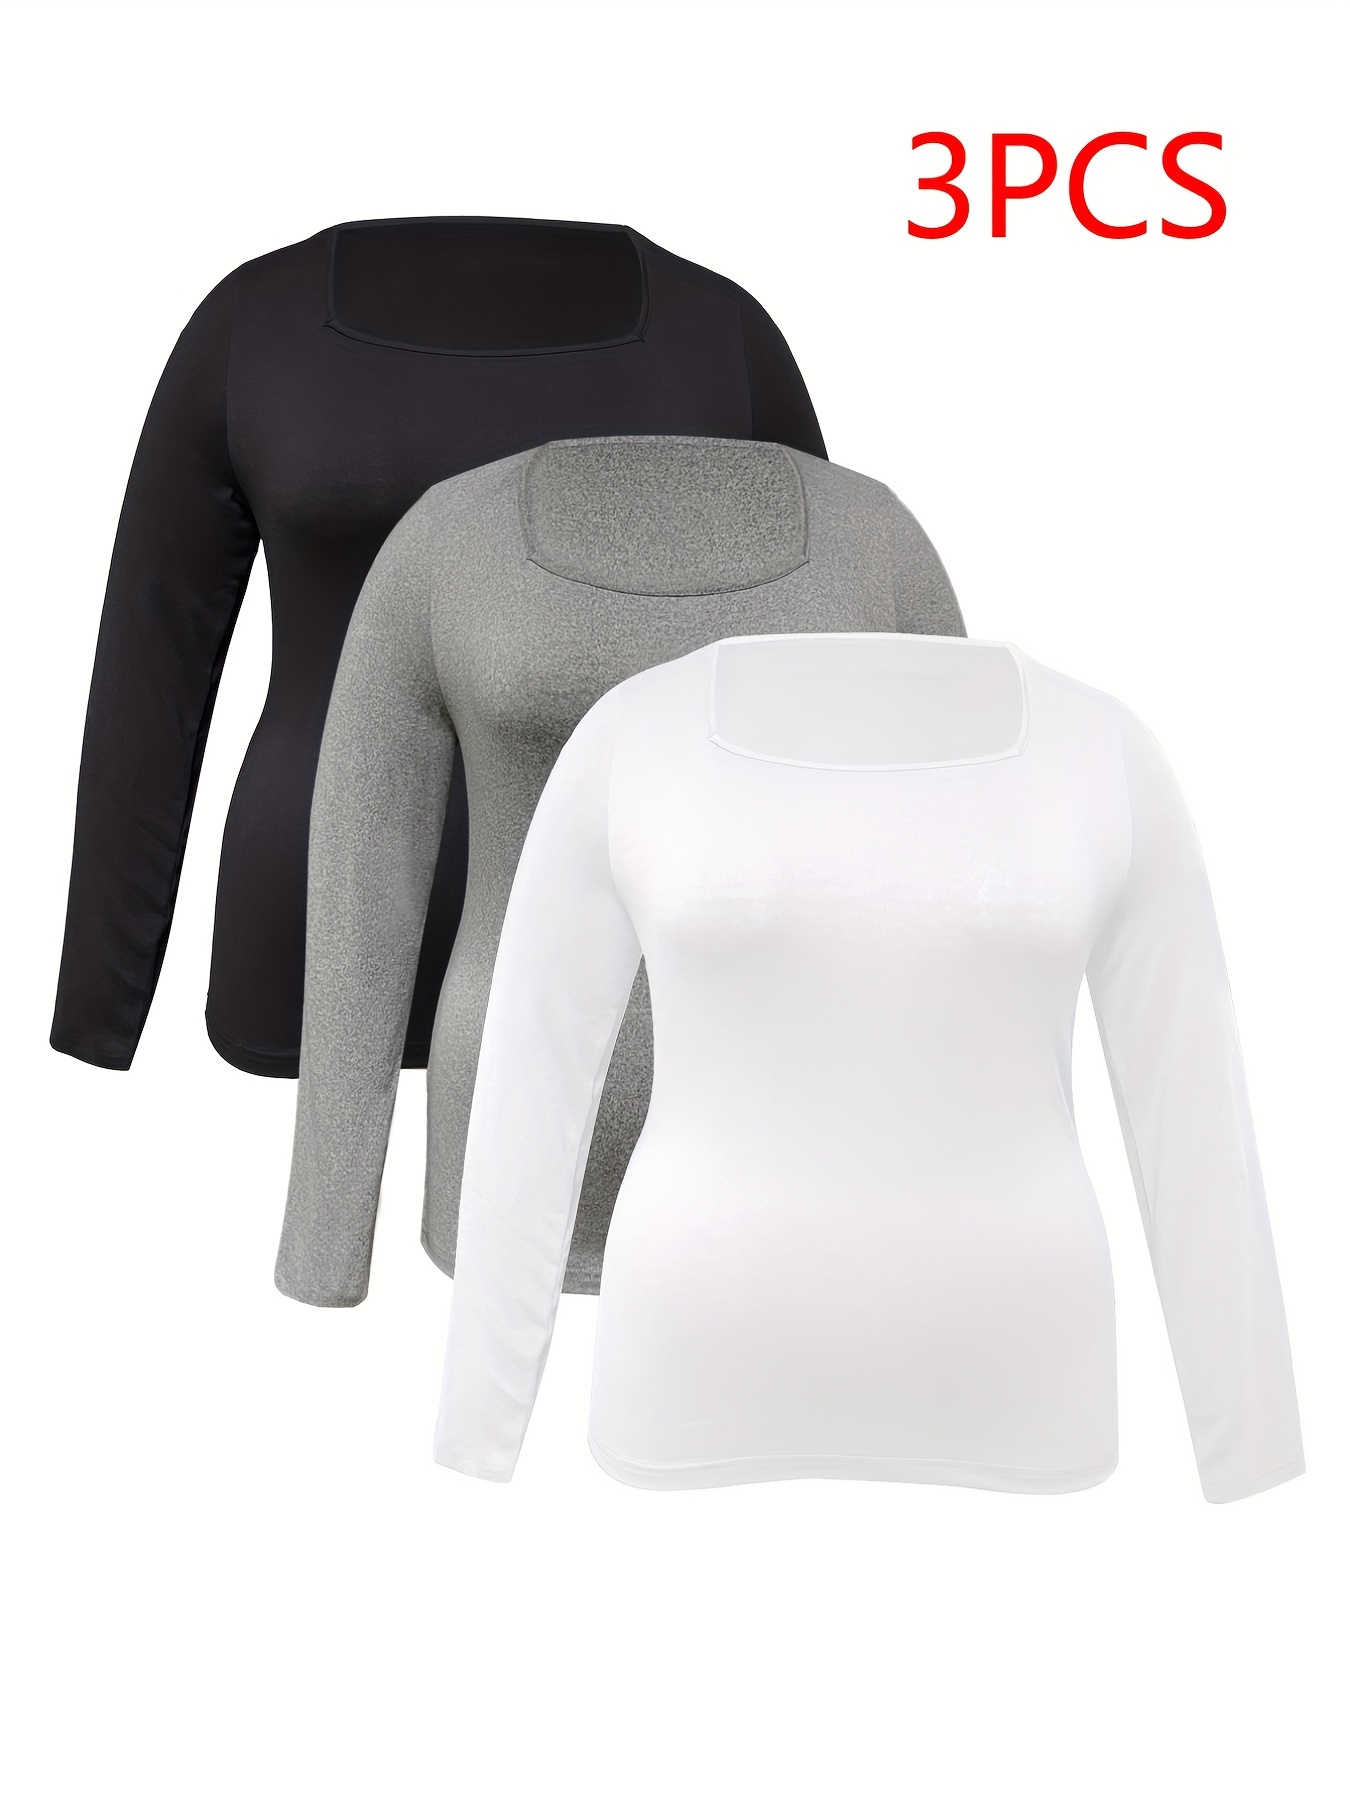 3 Pack: Womens Plus Size Crop Top Pullover Sweatshirt Sweater Fleece  Workout Athletic Clothes Running Fall Fashion Ladies Long Sleeve Crew Neck